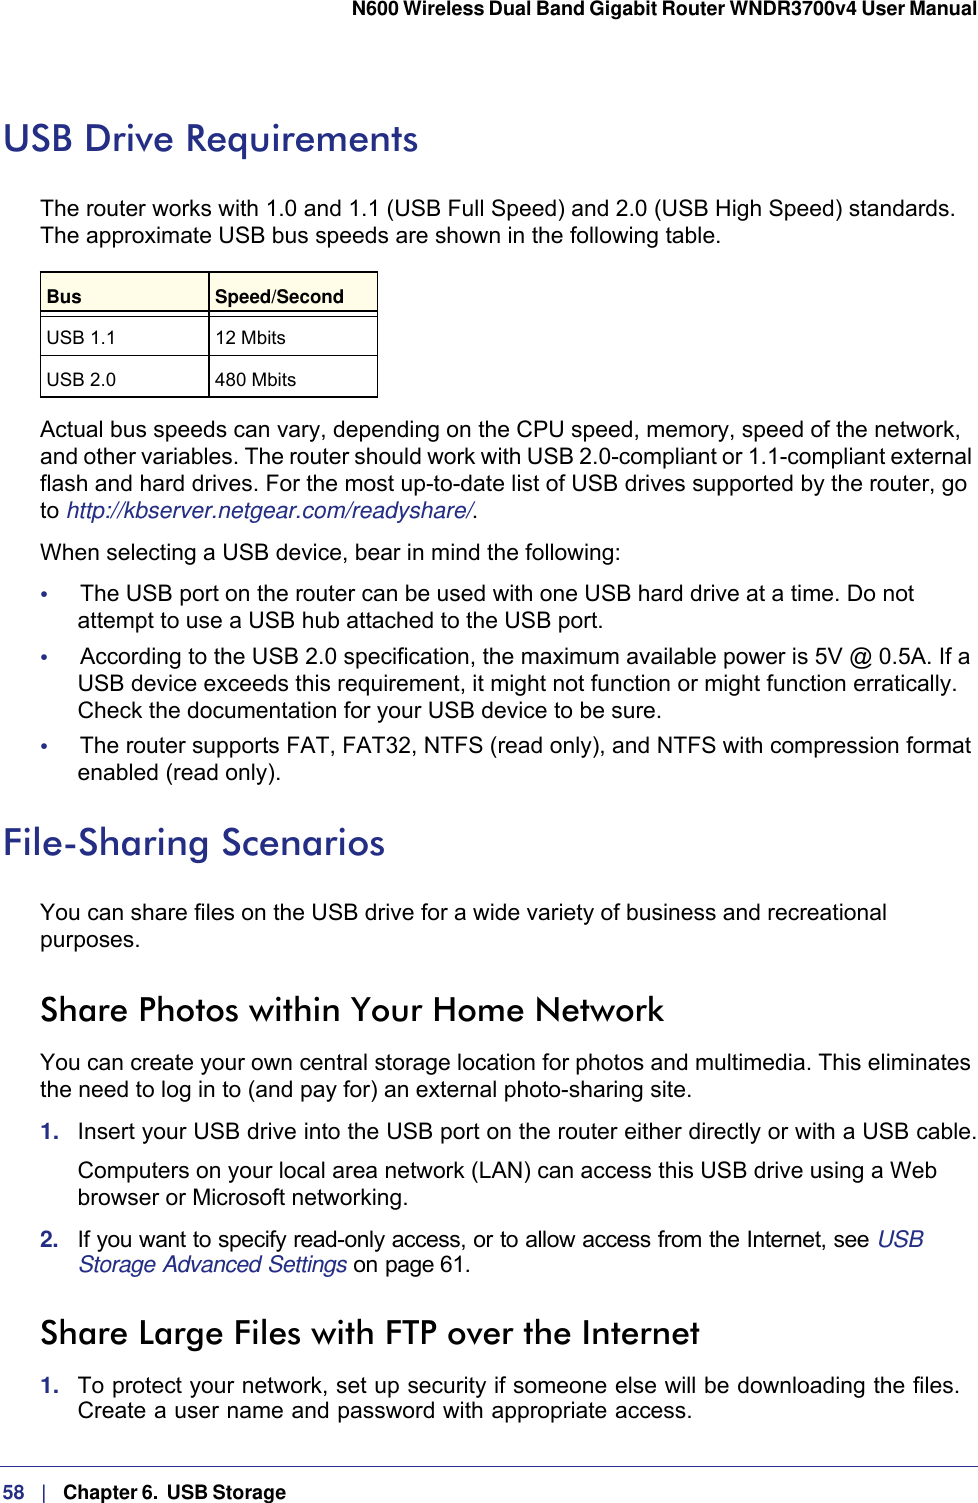 58   |   Chapter 6.  USB Storage  N600 Wireless Dual Band Gigabit Router WNDR3700v4 User Manual USB Drive RequirementsThe router works with 1.0 and 1.1 (USB Full Speed) and 2.0 (USB High Speed) standards. The approximate USB bus speeds are shown in the following table.Bus Speed/SecondUSB 1.1 12 MbitsUSB 2.0 480 MbitsActual bus speeds can vary, depending on the CPU speed, memory, speed of the network, and other variables. The router should work with USB 2.0-compliant or 1.1-compliant external flash and hard drives. For the most up-to-date list of USB drives supported by the router, go to http://kbserver.netgear.com/readyshare/.When selecting a USB device, bear in mind the following: •     The USB port on the router can be used with one USB hard drive at a time. Do not attempt to use a USB hub attached to the USB port.•     According to the USB 2.0 specification, the maximum available power is 5V @ 0.5A. If a USB device exceeds this requirement, it might not function or might function erratically. Check the documentation for your USB device to be sure.•     The router supports FAT, FAT32, NTFS (read only), and NTFS with compression format enabled (read only). File-Sharing ScenariosYou can share files on the USB drive for a wide variety of business and recreational purposes. Share Photos within Your Home NetworkYou can create your own central storage location for photos and multimedia. This eliminates the need to log in to (and pay for) an external photo-sharing site. 1.  Insert your USB drive into the USB port on the router either directly or with a USB cable.Computers on your local area network (LAN) can access this USB drive using a Web browser or Microsoft networking.2.  If you want to specify read-only access, or to allow access from the Internet, see USB Storage Advanced Settings on page 61.Share Large Files with FTP over the Internet1.  To protect your network, set up security if someone else will be downloading the files. Create a user name and password with appropriate access.